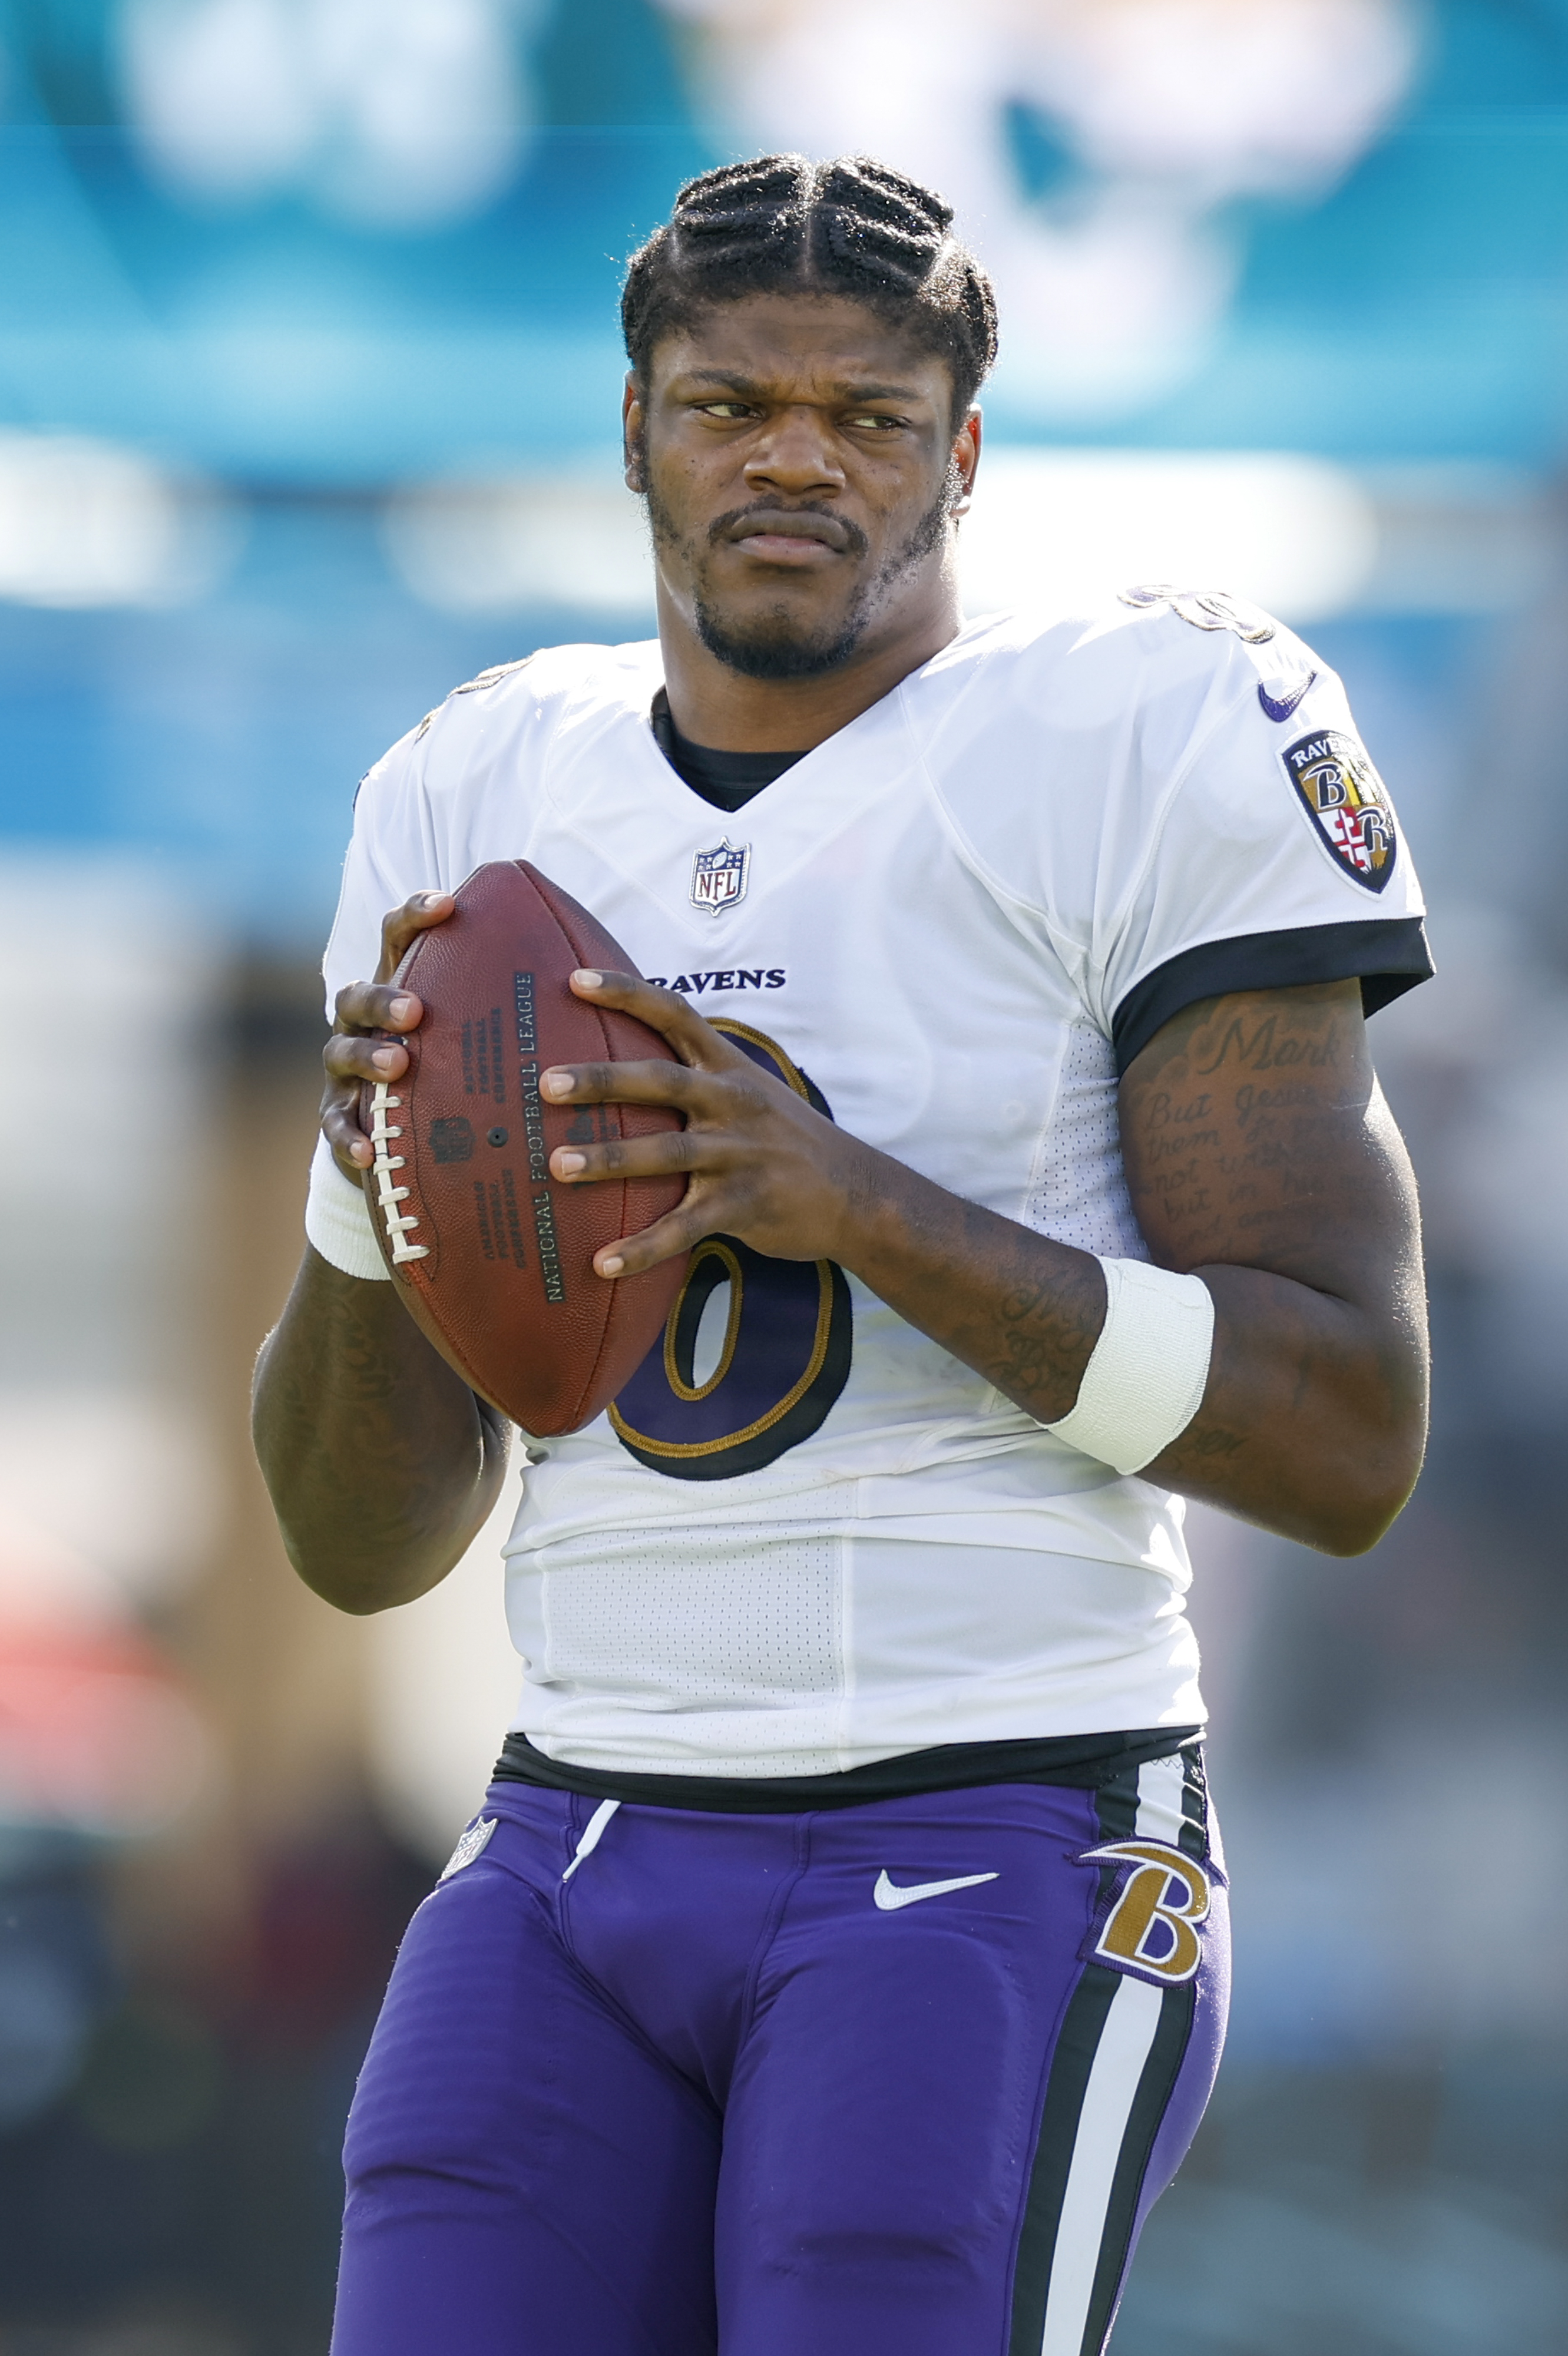 Lamar Jackson at the game between the Baltimore Ravens and the Jacksonville Jaguars on November 27, 2022, at TIAA Bank Field in Jacksonville, Florida. | Source: Getty Images